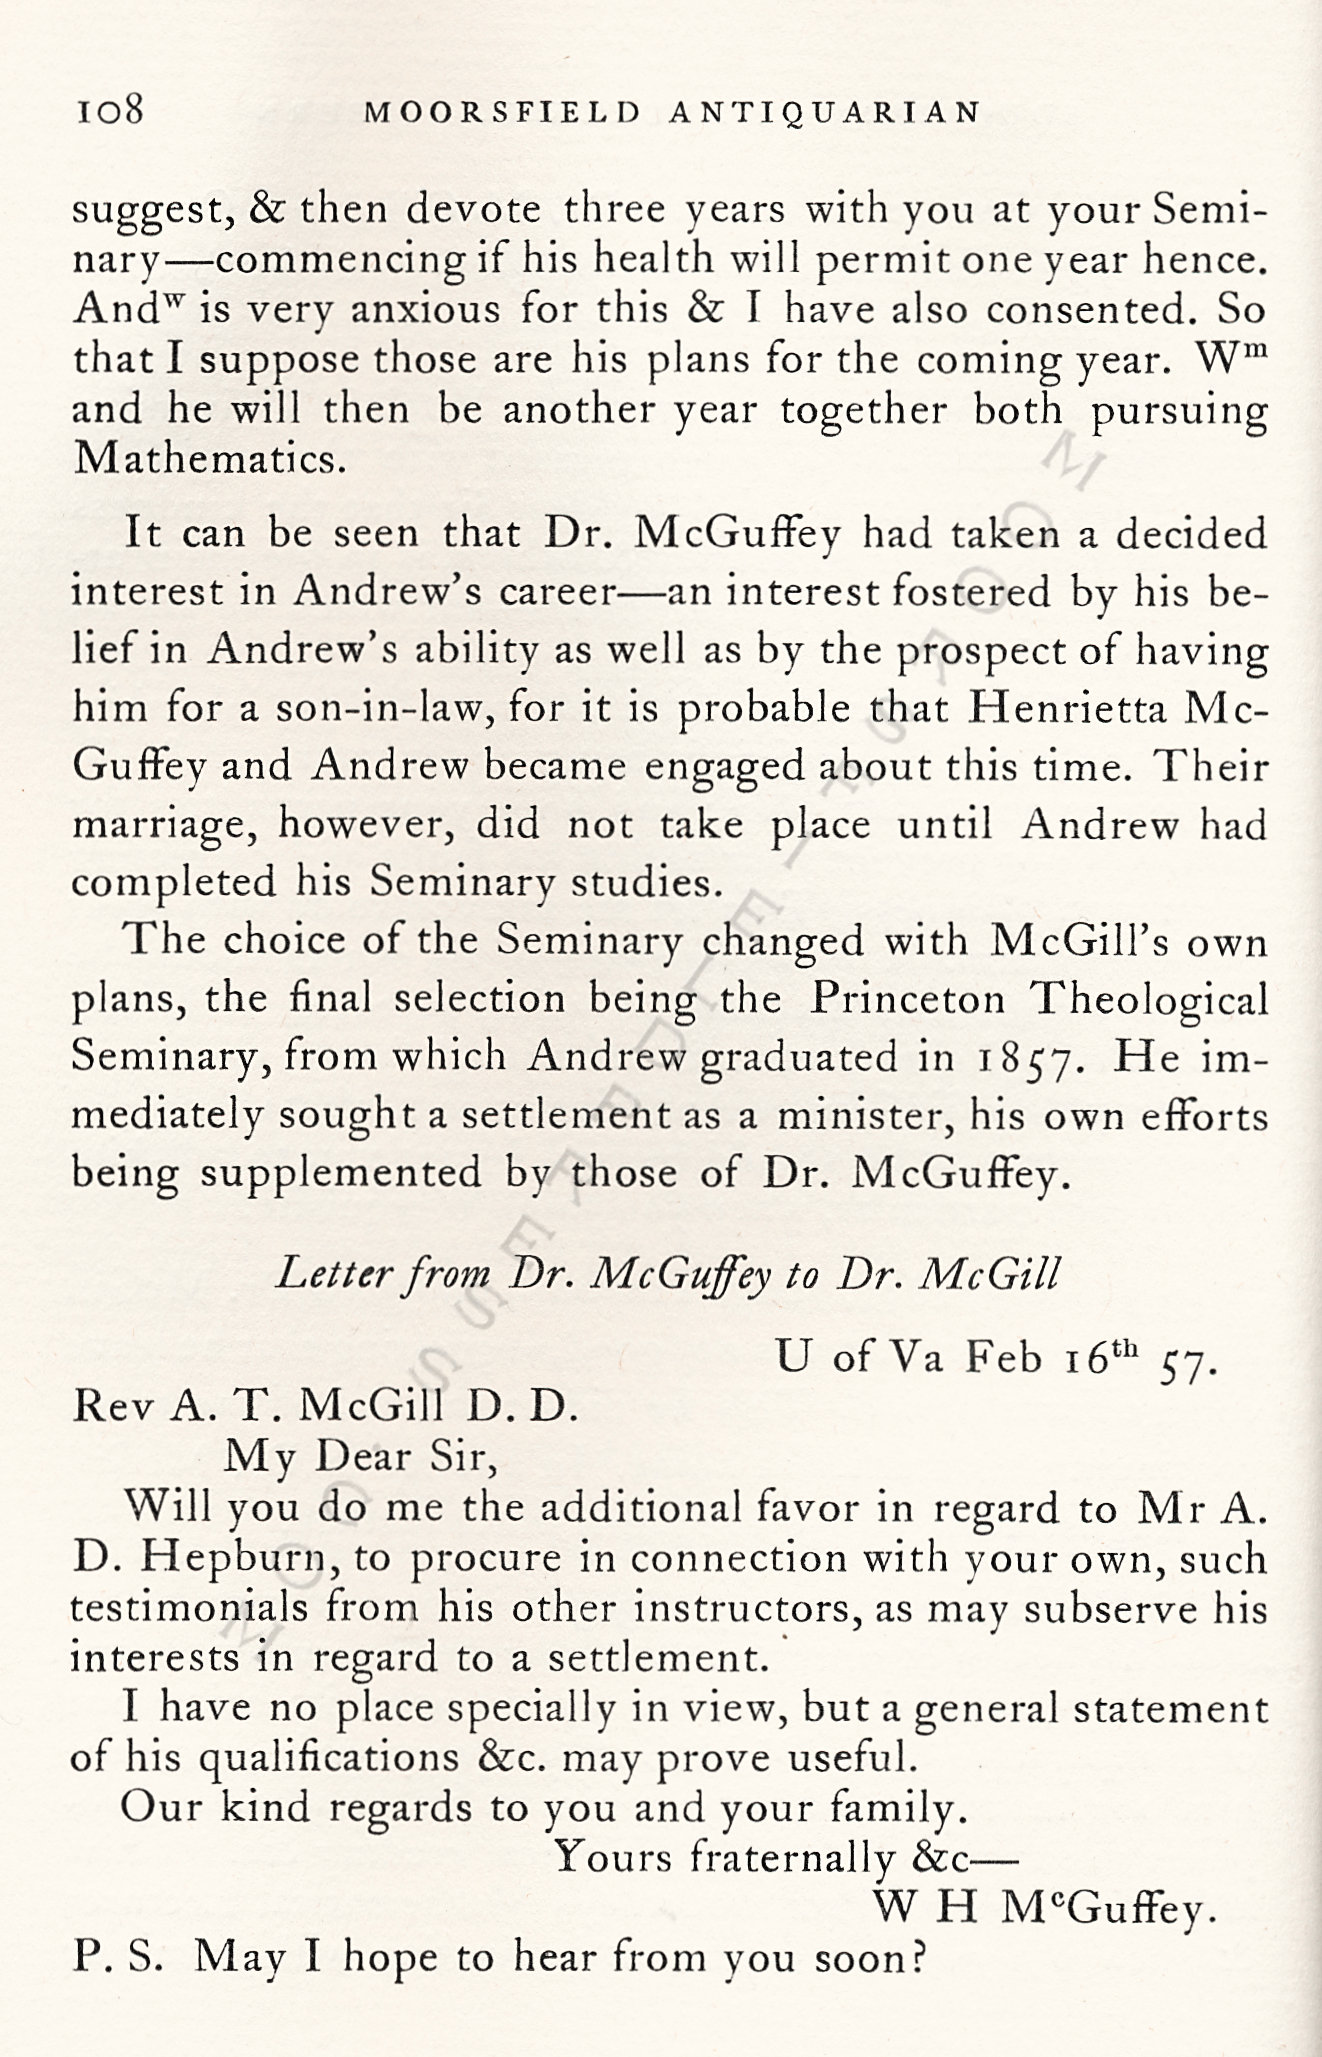 McGill
                      Papers-Education of Andrew D. Hepburn 1848
                      Son-in-law of William Holmes McGuffey 1848-1857